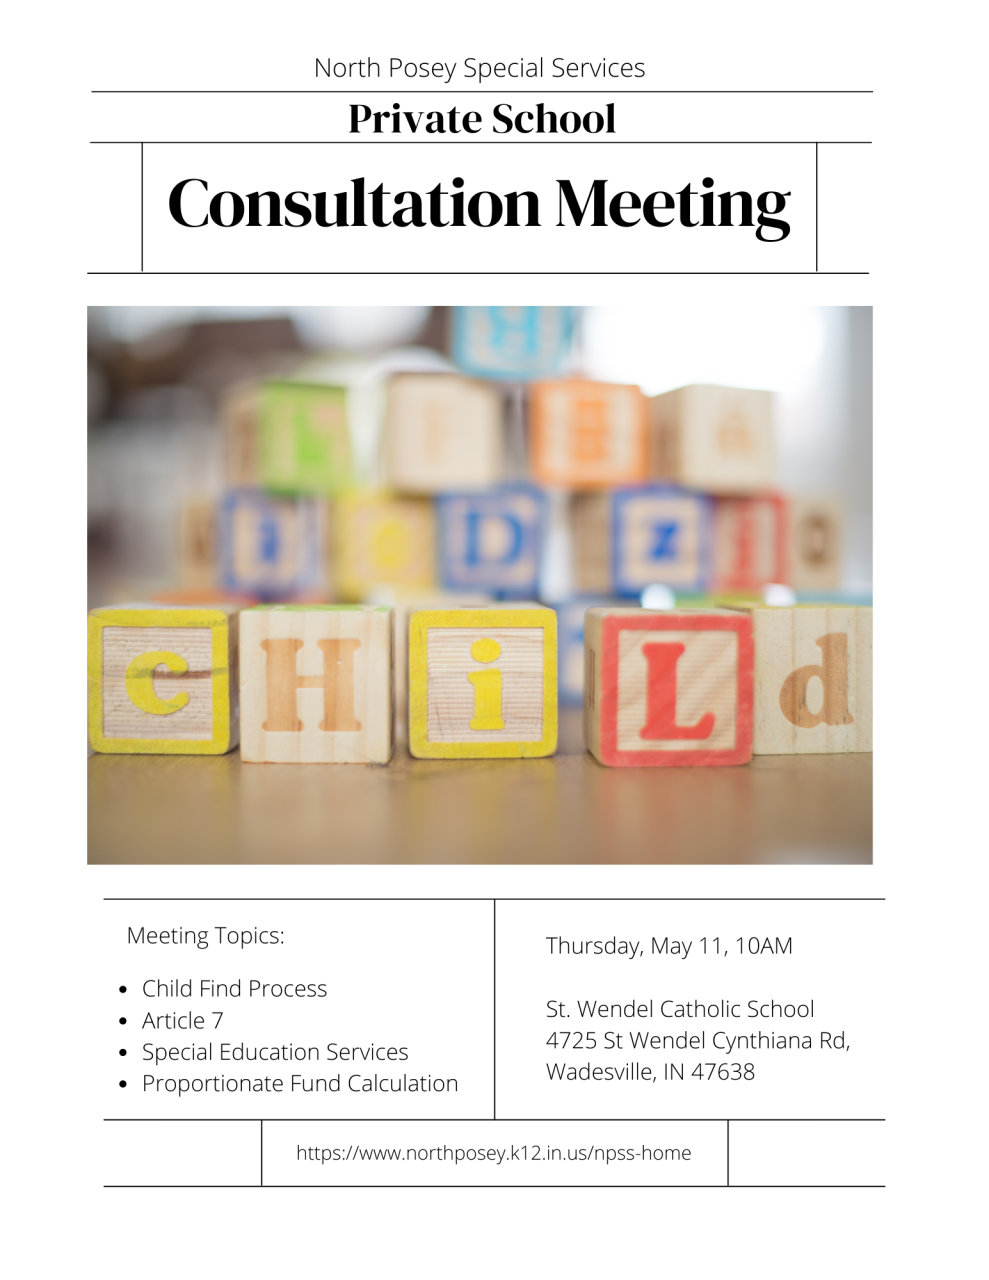 NPSS Private School Consultation Meeting